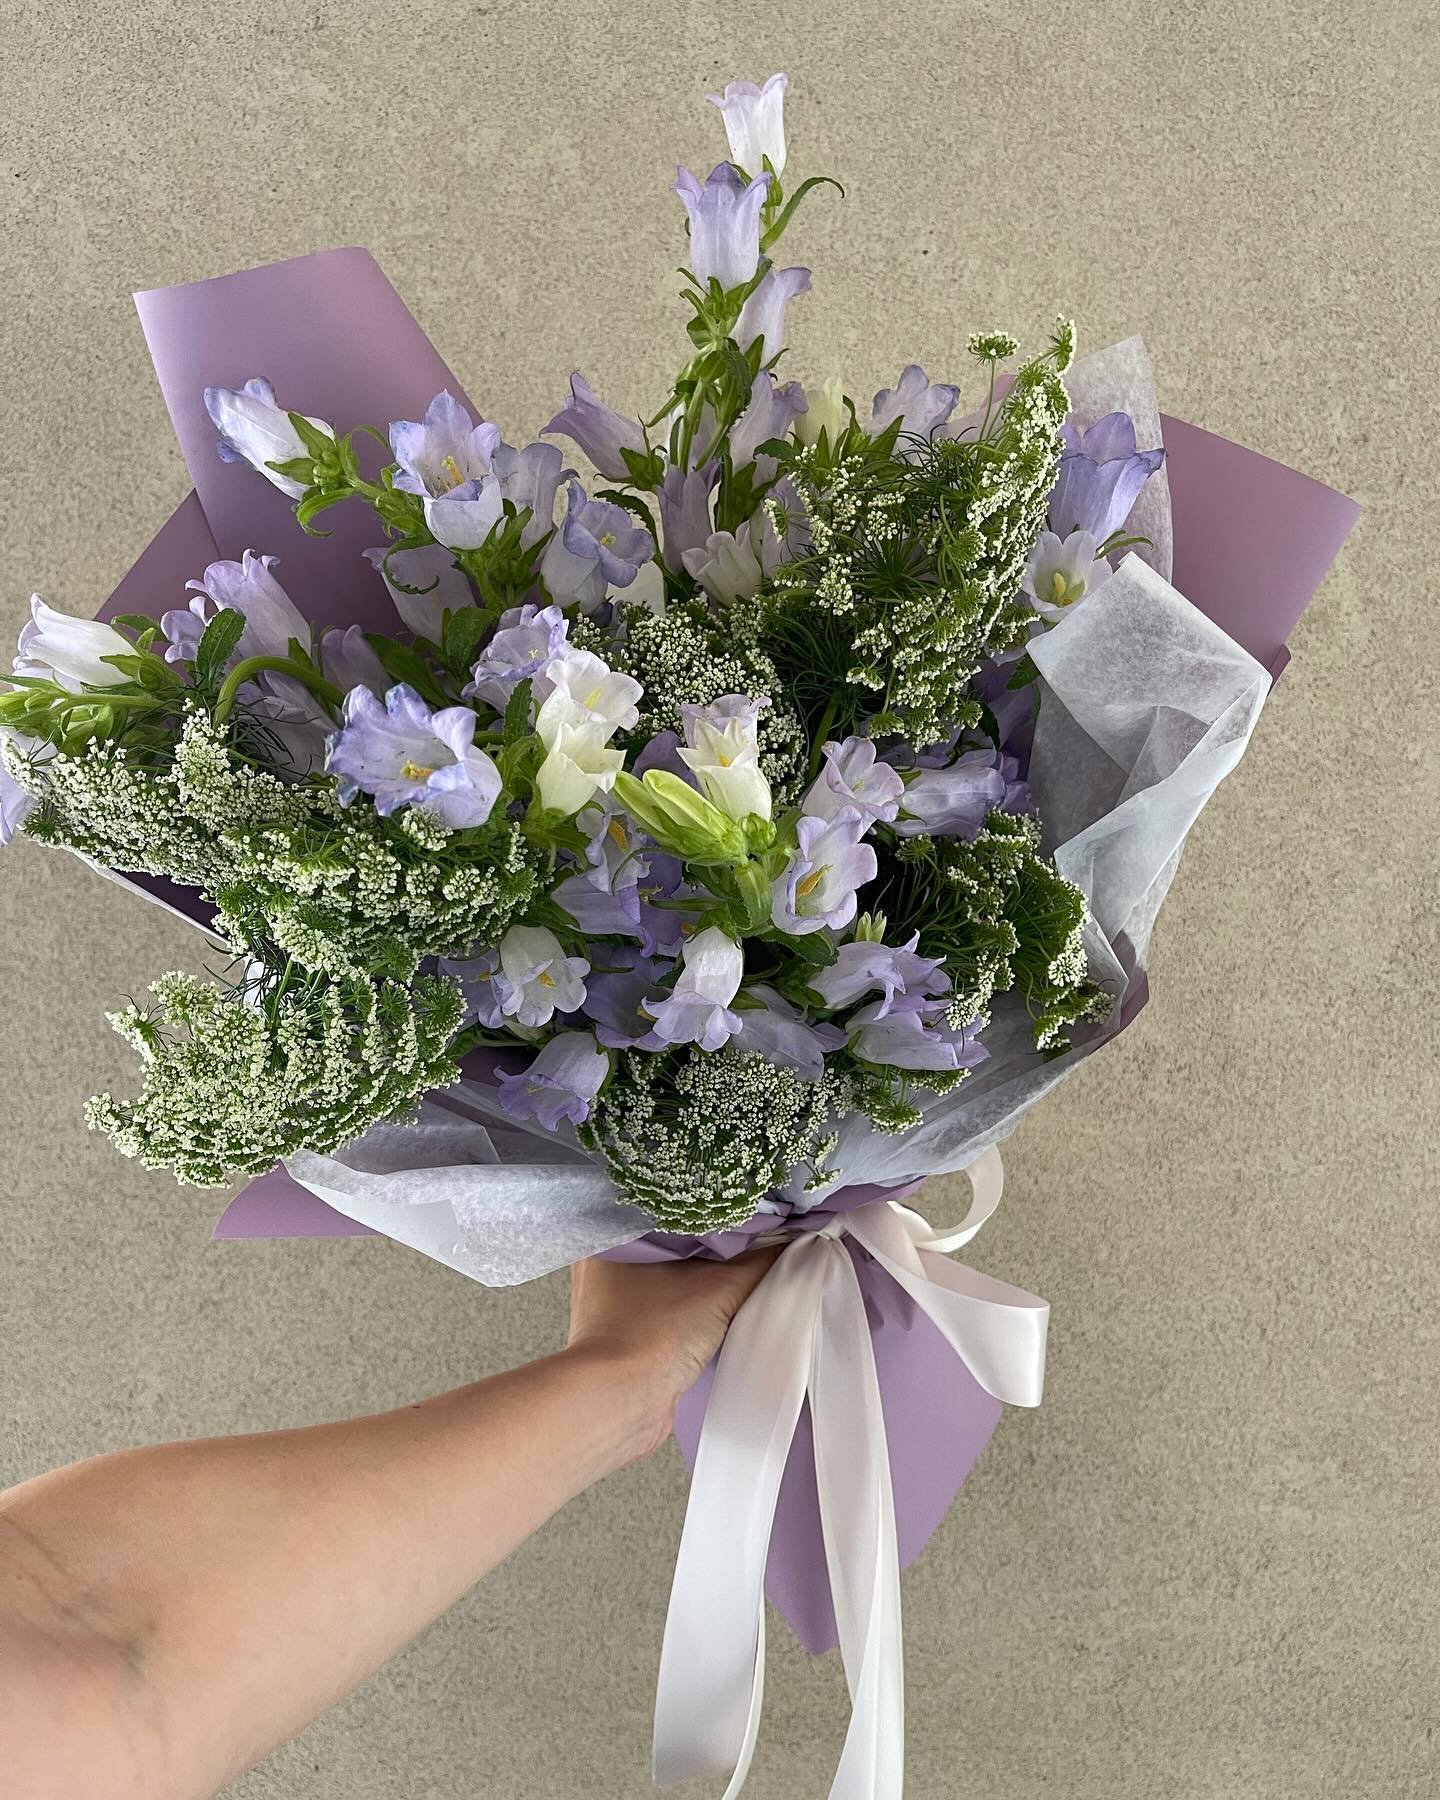 A vision in purple 💜

Here&rsquo;s your sign to send that special someone a bouquet of flowers 💐 

#bellflower #purplebouquet #houstonflorist #houstonflowerdelivery #houstonflowers #houstonflowershop